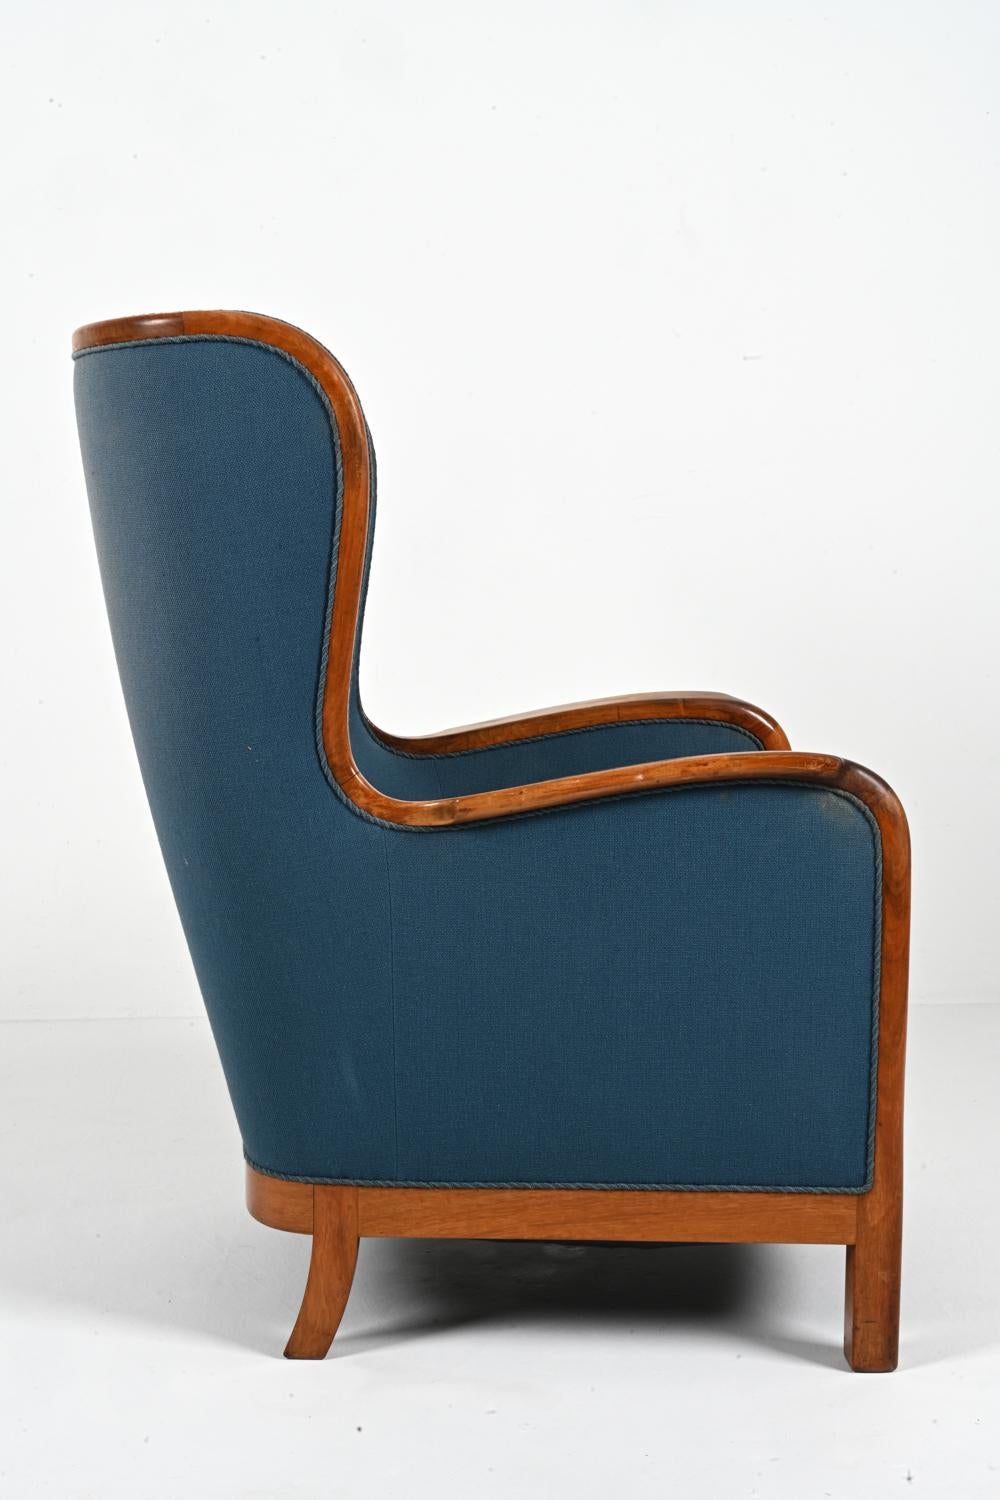 Danish Mahogany Wingback Easy Chair by Frits Henningsen, c. 1940's For Sale 10